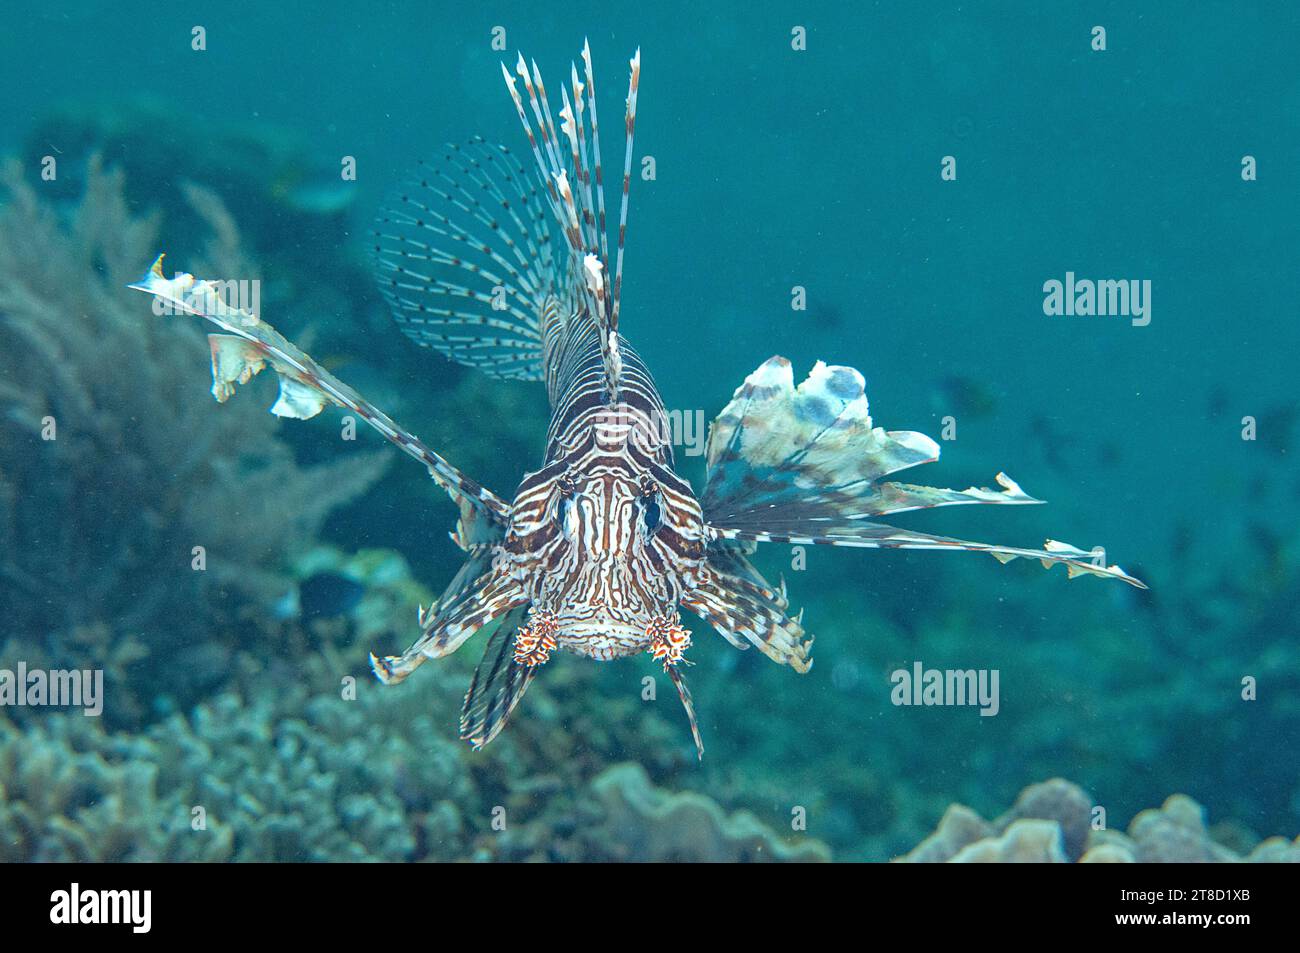 Red lion-fish swims over corals of Bali Stock Photo